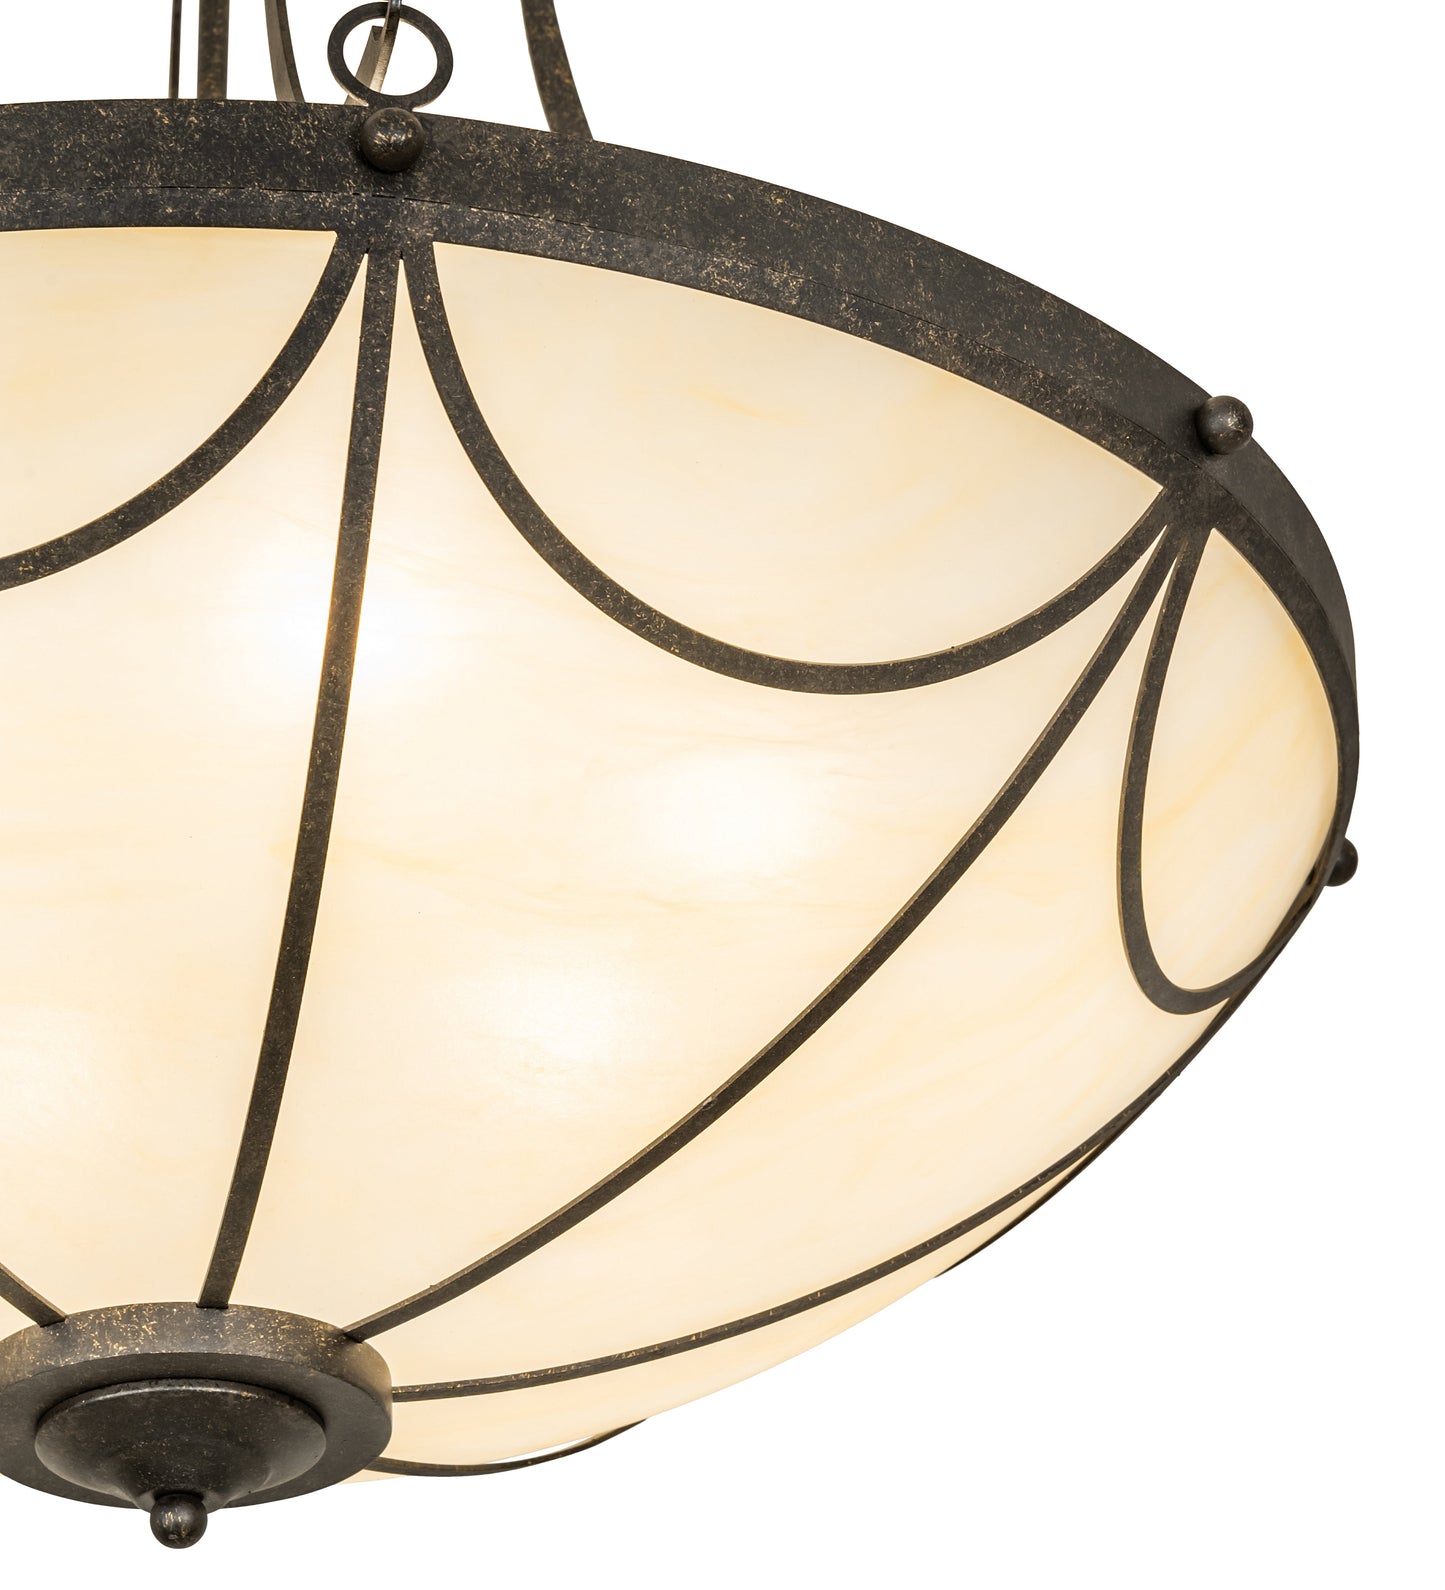 27" Carousel Pendant by 2nd Ave Lighting